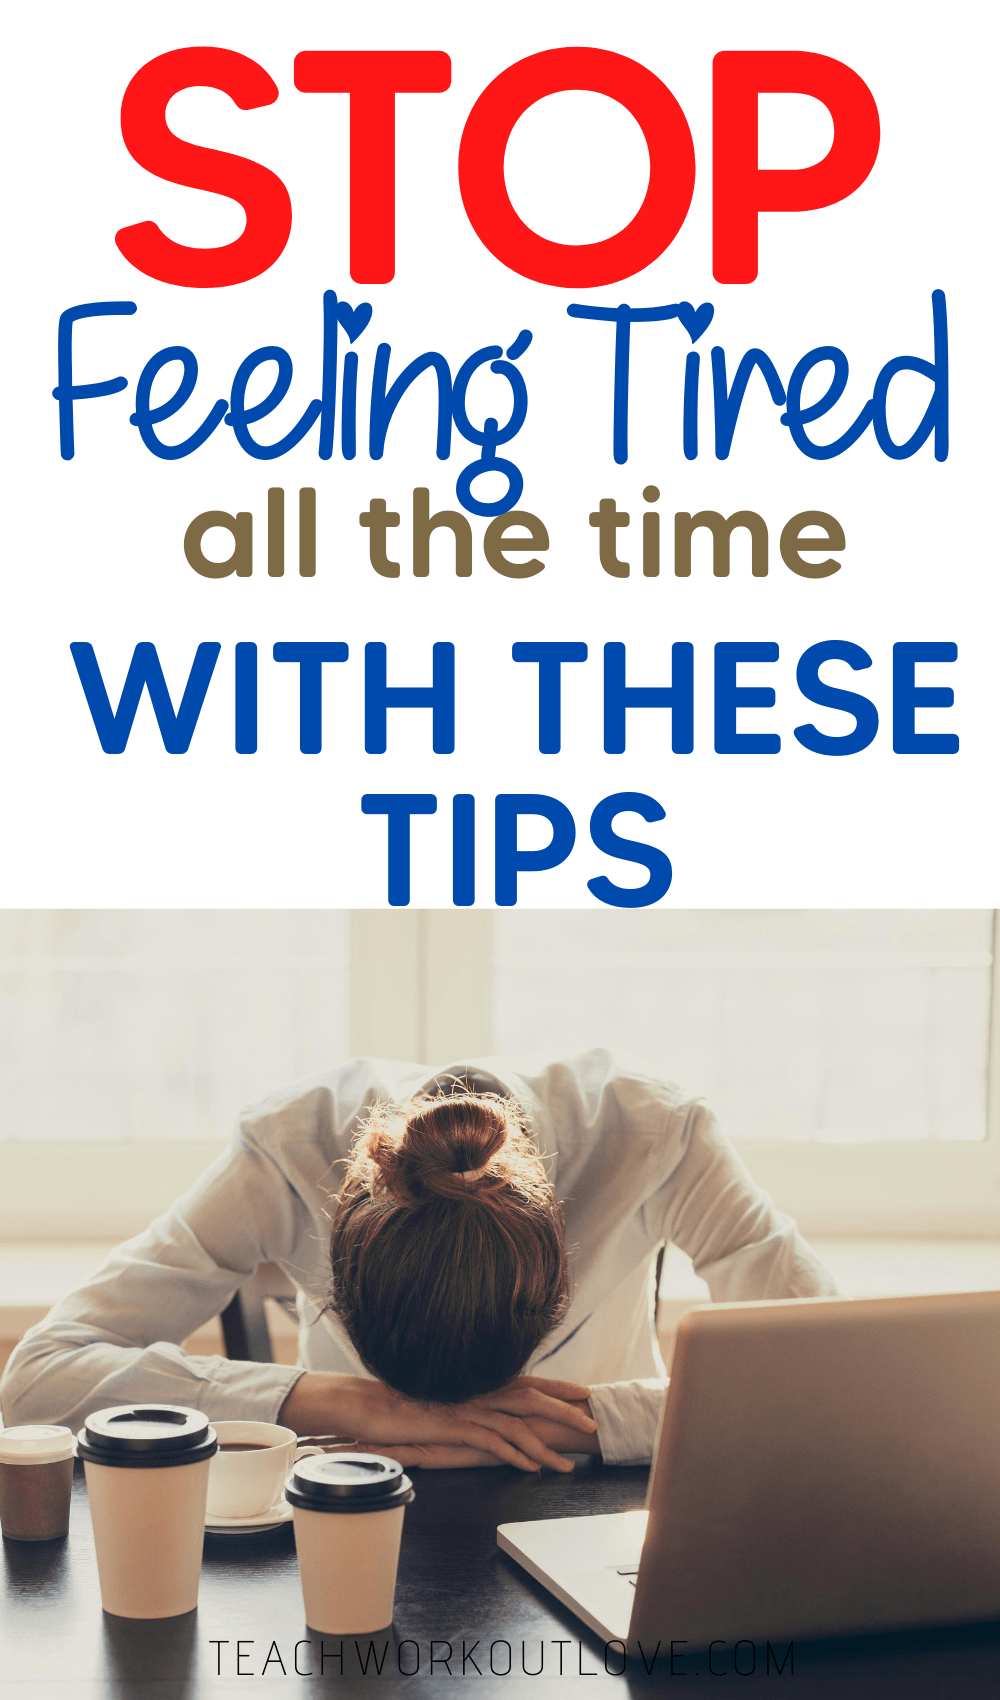 With the fast-paced lifestyle and hectic schedules in today’s world, it comes as no surprise that many individuals feel tired all the time.